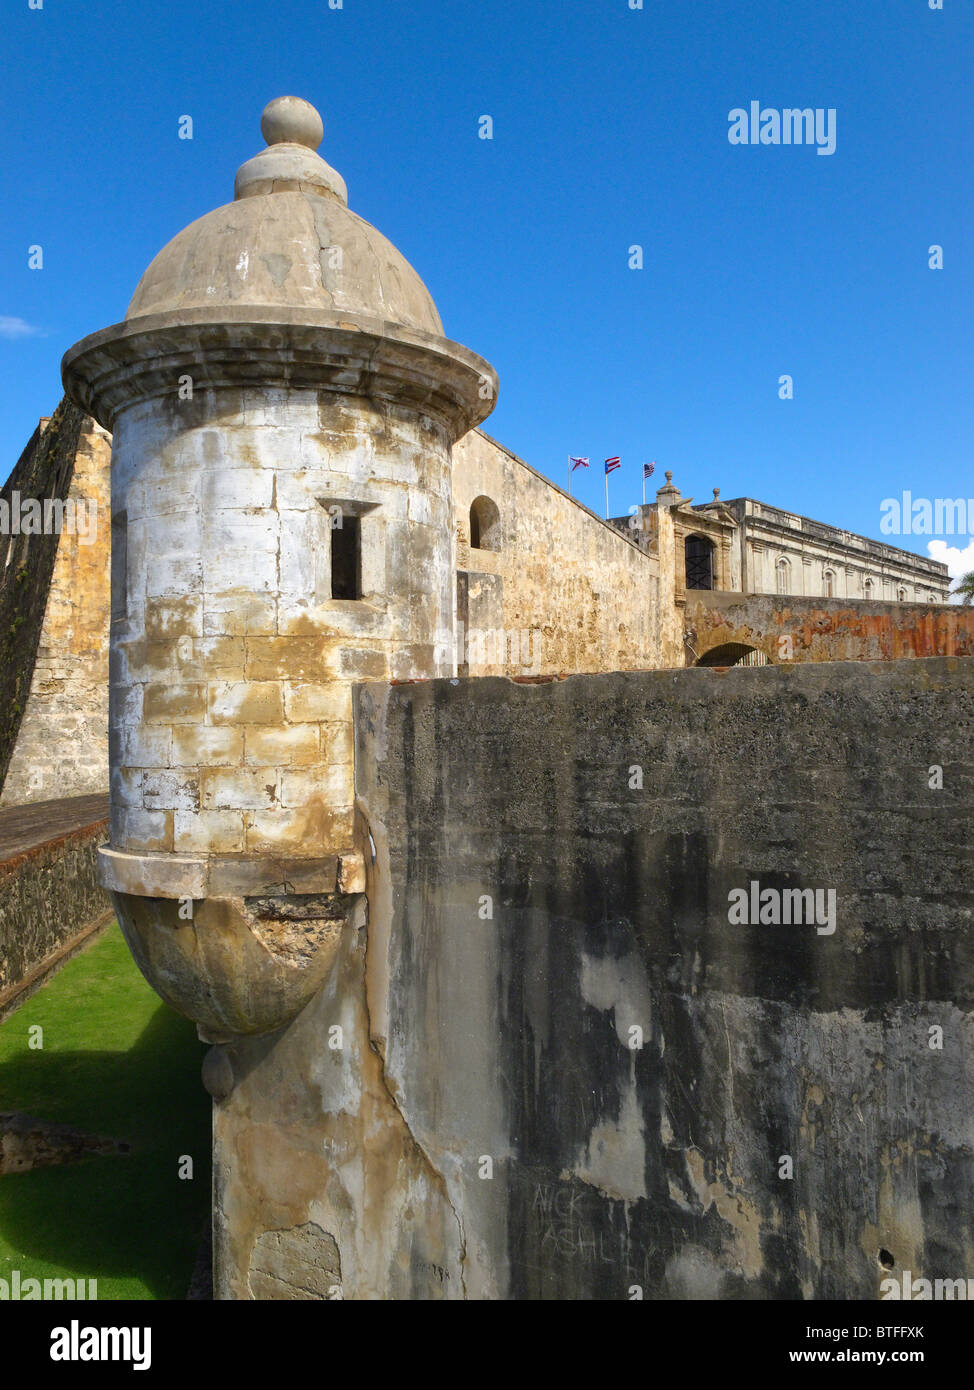 View of the Walls and Entrance of a Fort, San Cristobal Fort, Old San Juan, Puerto Rico Stock Photo